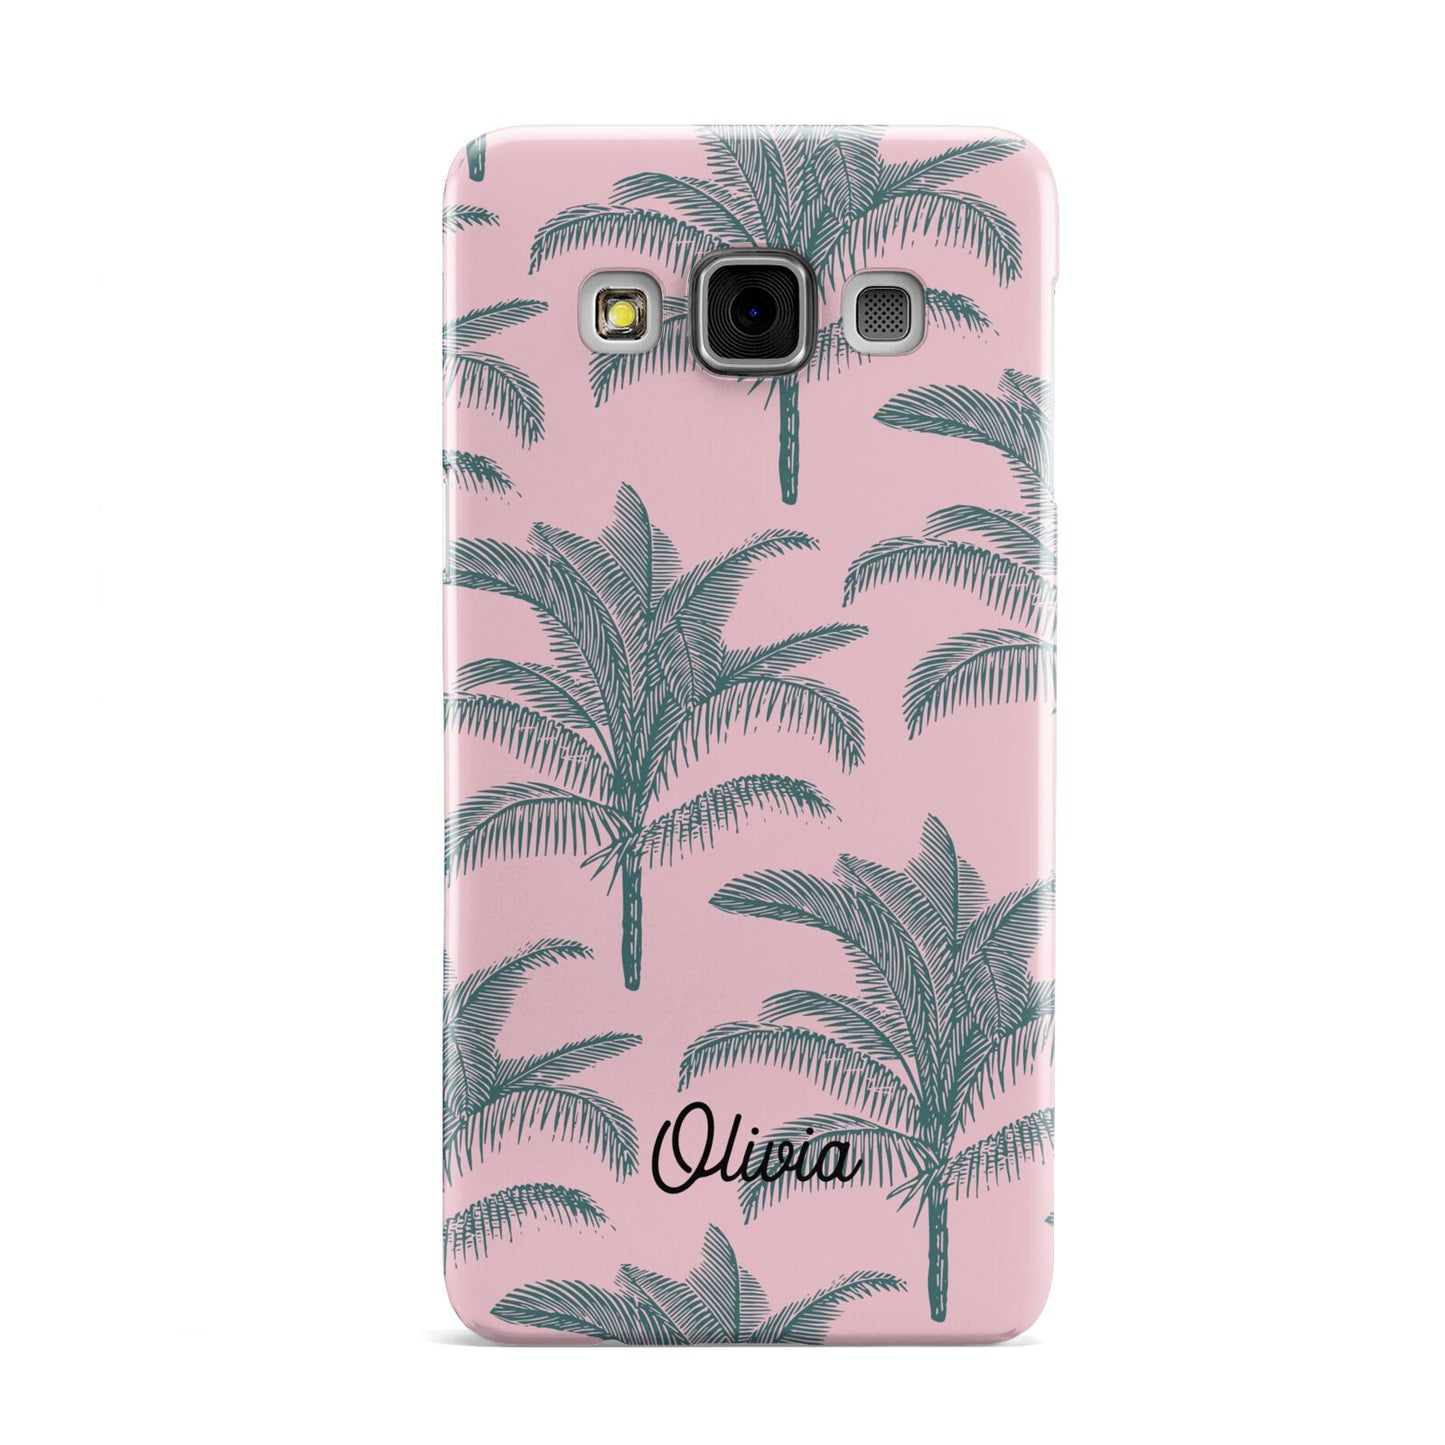 Personalised Palm Samsung Galaxy A3 Case